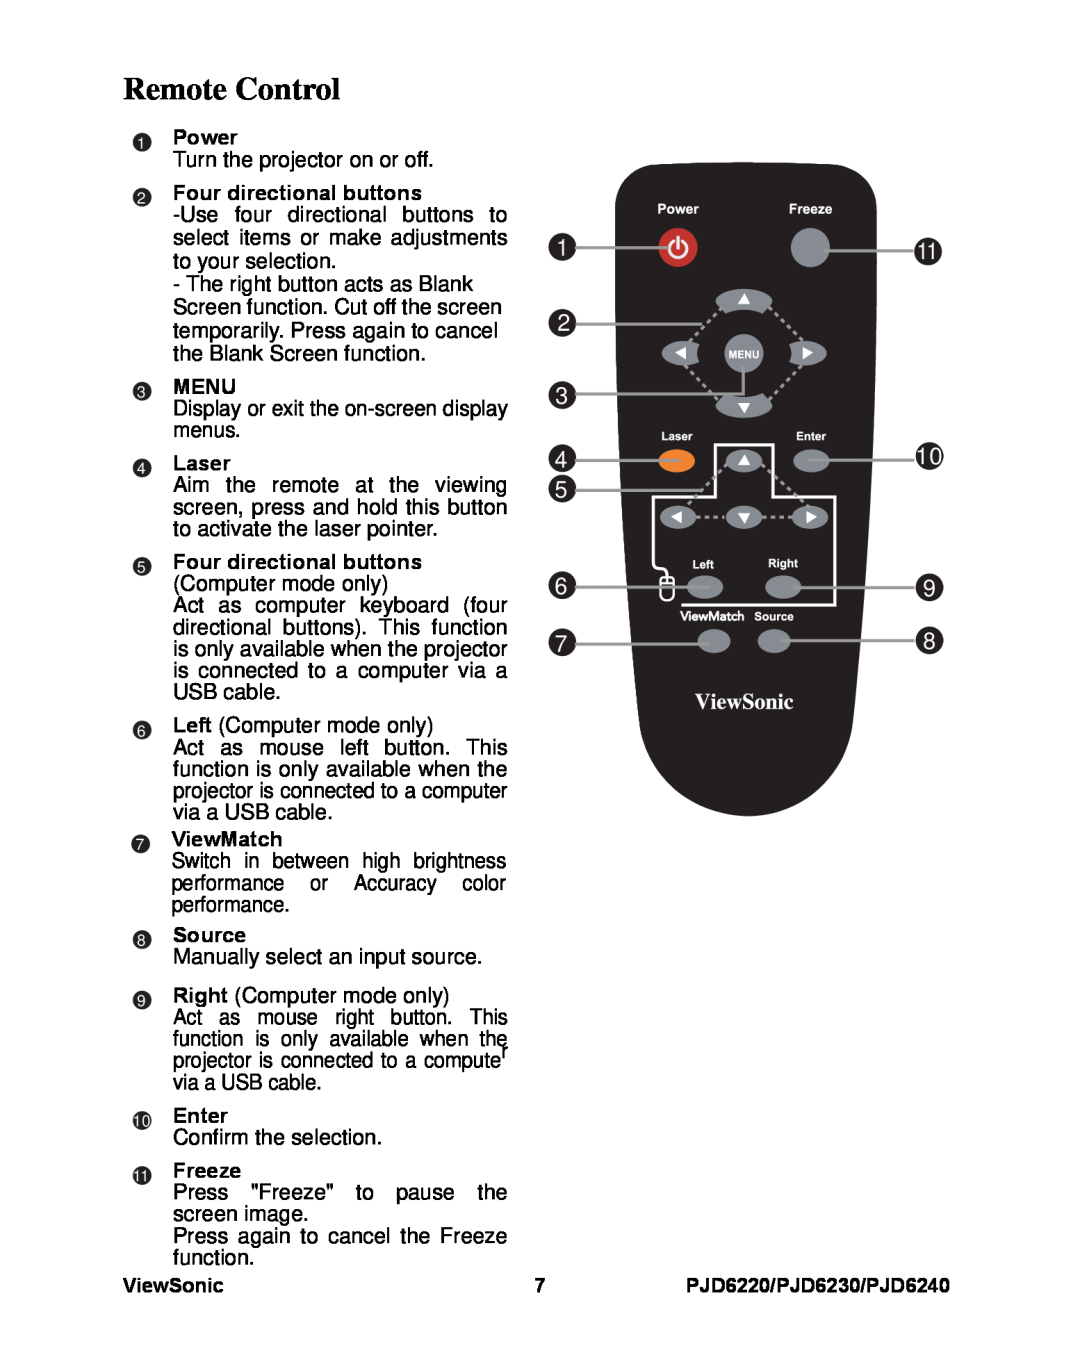 ViewSonic PJD6220, PJD6240, PJD6230 Remote Control, Power, Four directional buttons, Menu, Laser, ViewMatch, Source, Freeze 